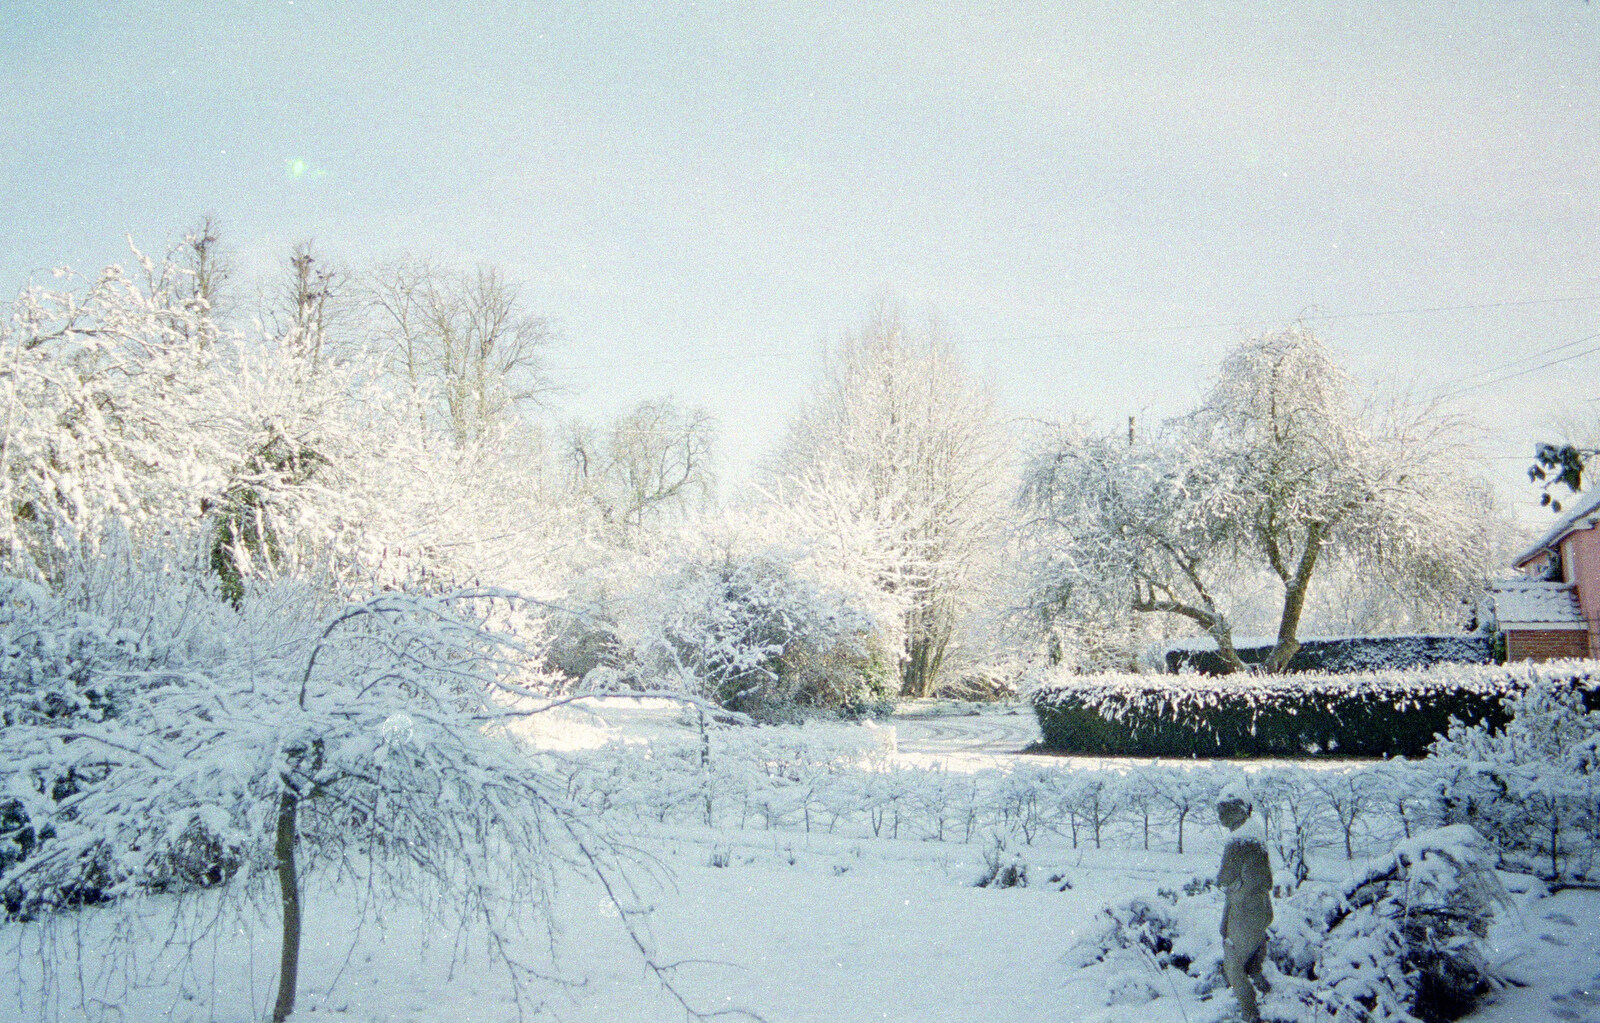 The front garden is a winter wonderland from 3G Lab, and Building a Staircase, Brome, Suffolk - 11th February 2001